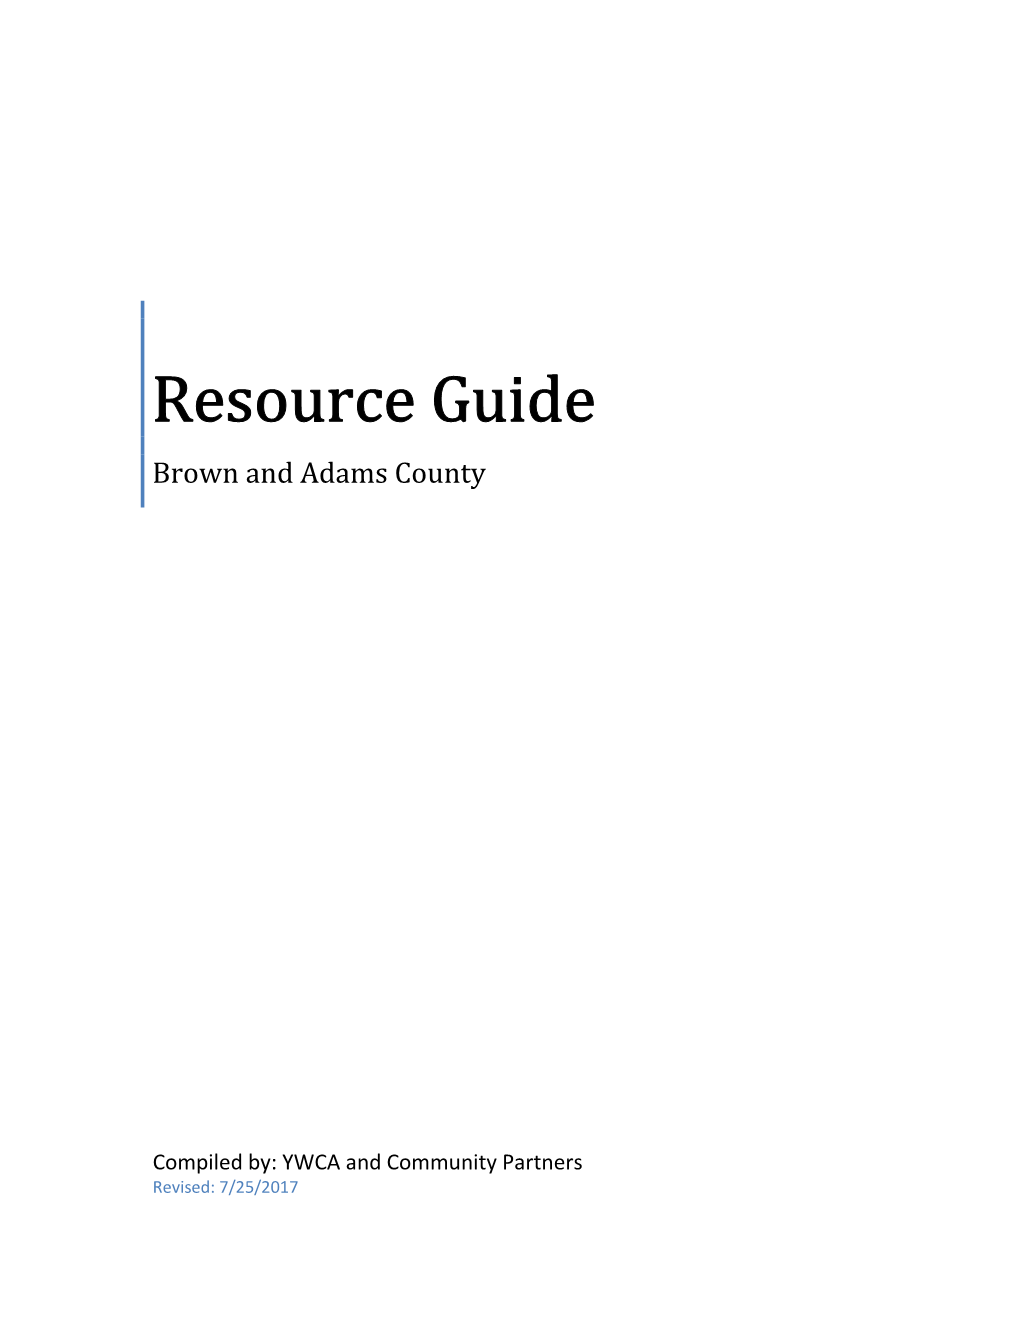 Brown-Adams County Resource Guide